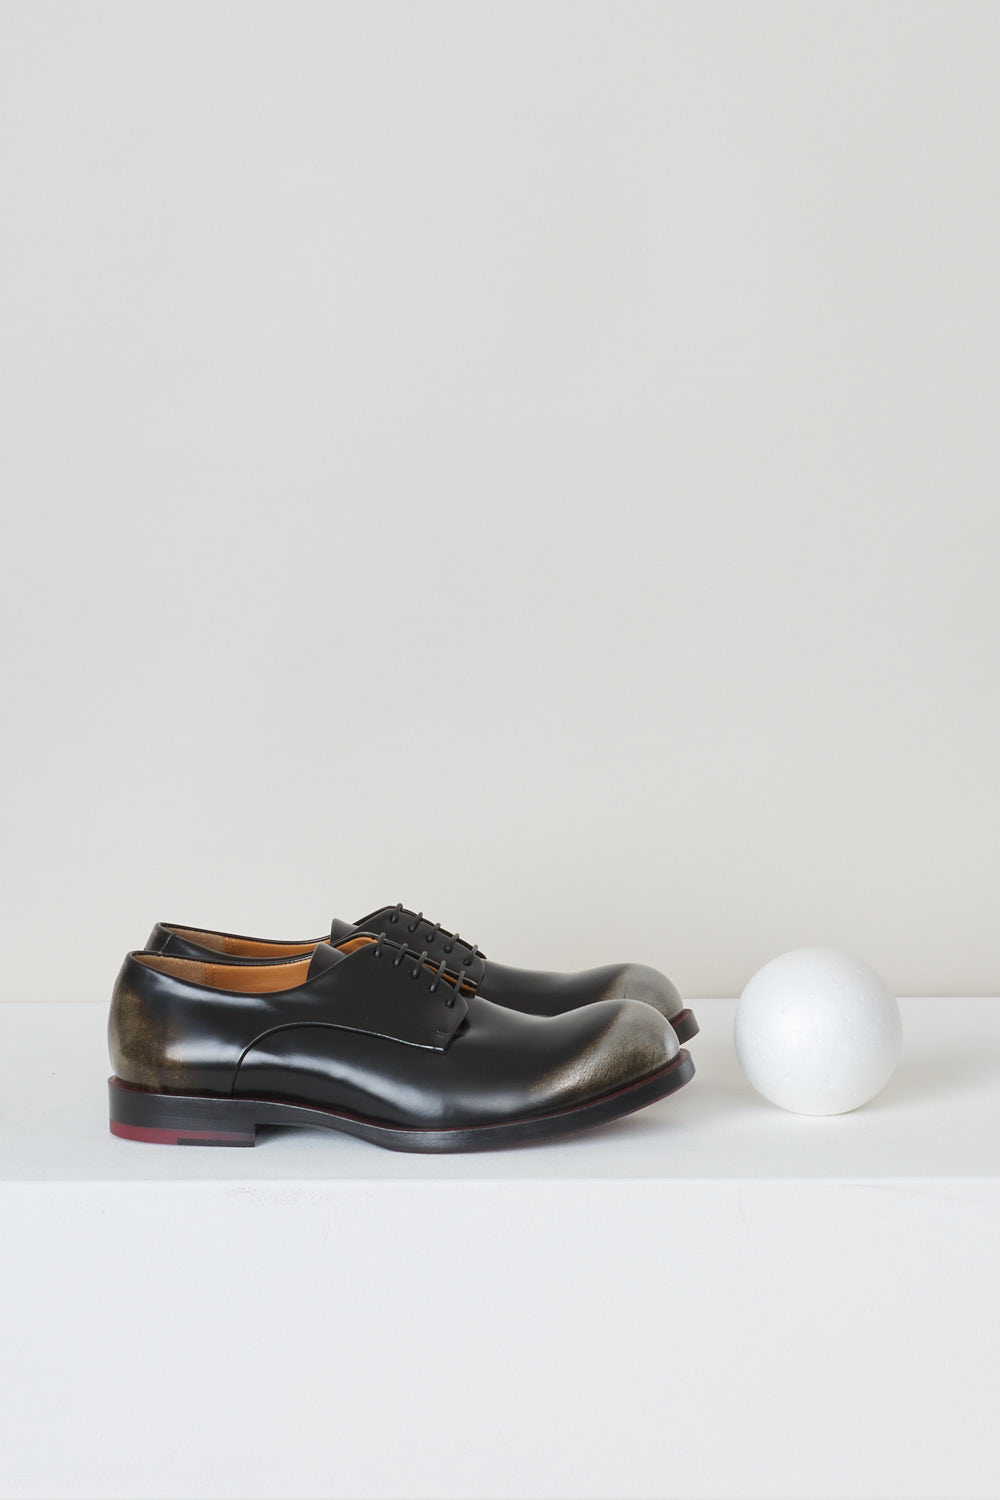 Jil Sander, Black derby shoes with silver and red accents, JS23018_1ASZ17_keope_tric_089, black, red, silver, side, Derby shoes in black with a silver heel and toes, and with red accents on the sole. 